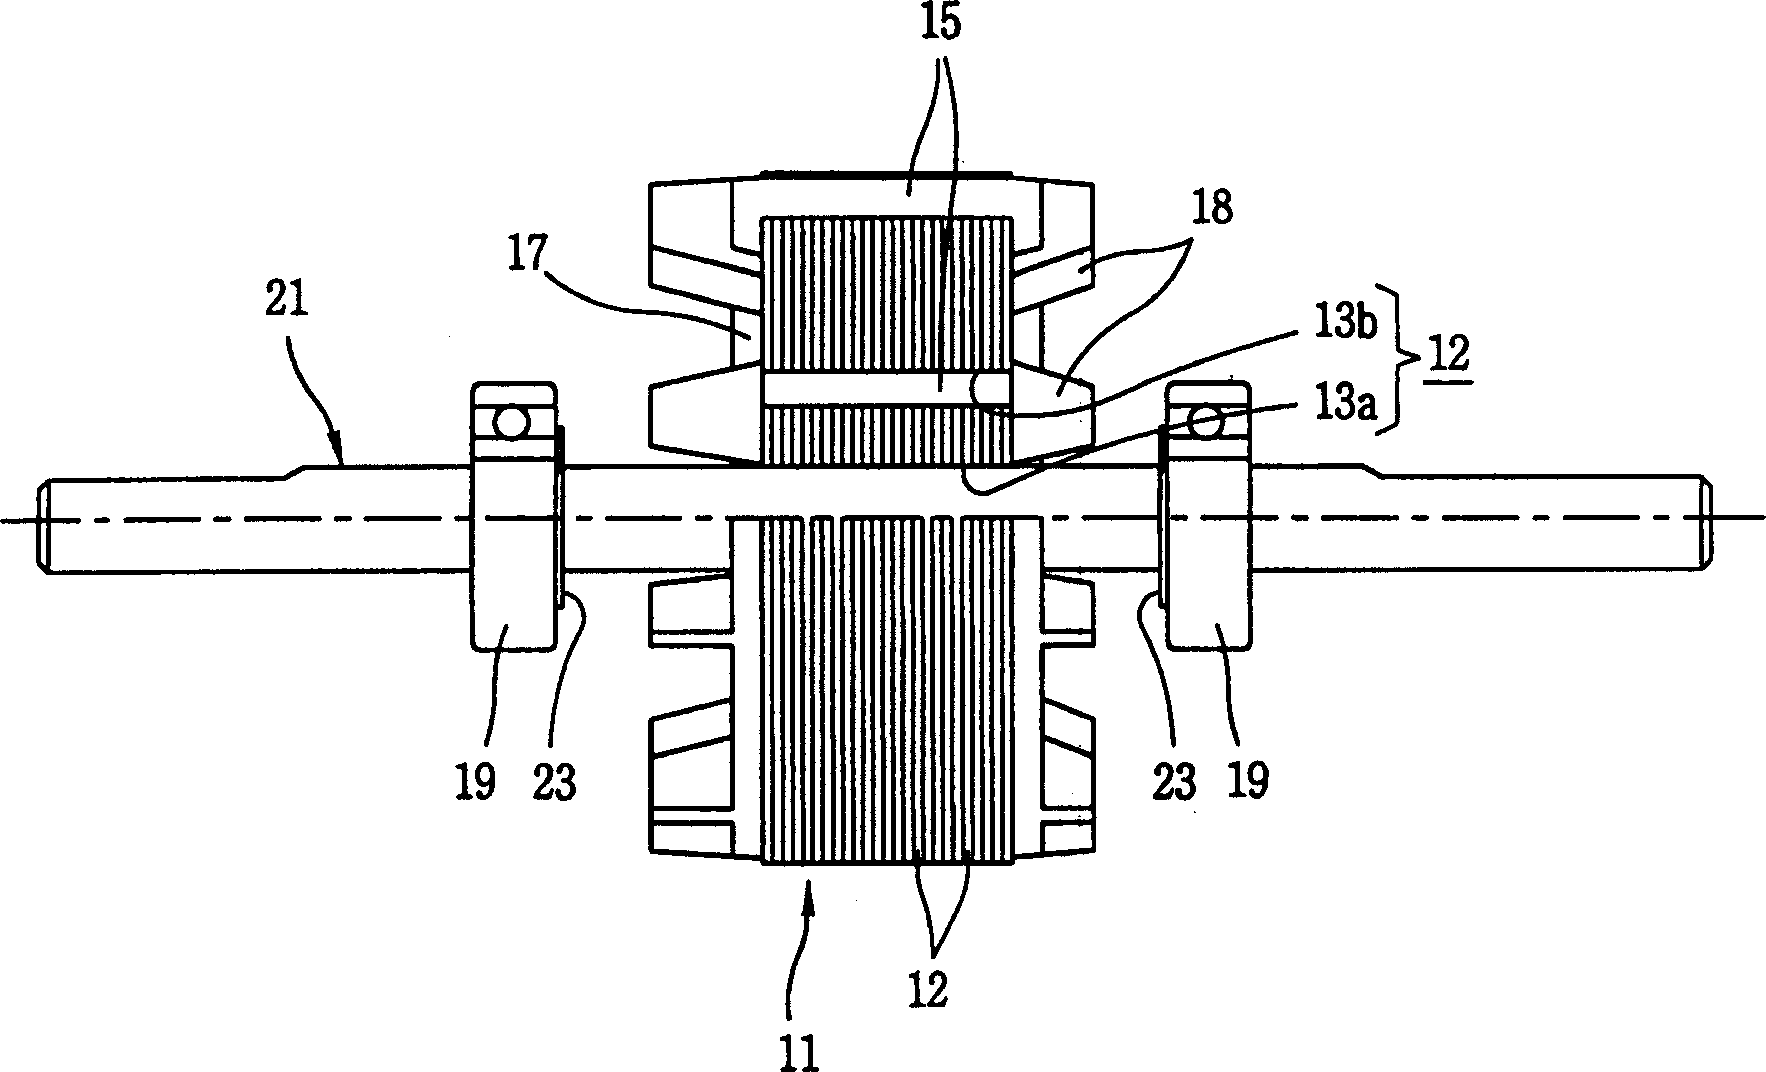 Rotating axle of induction motor